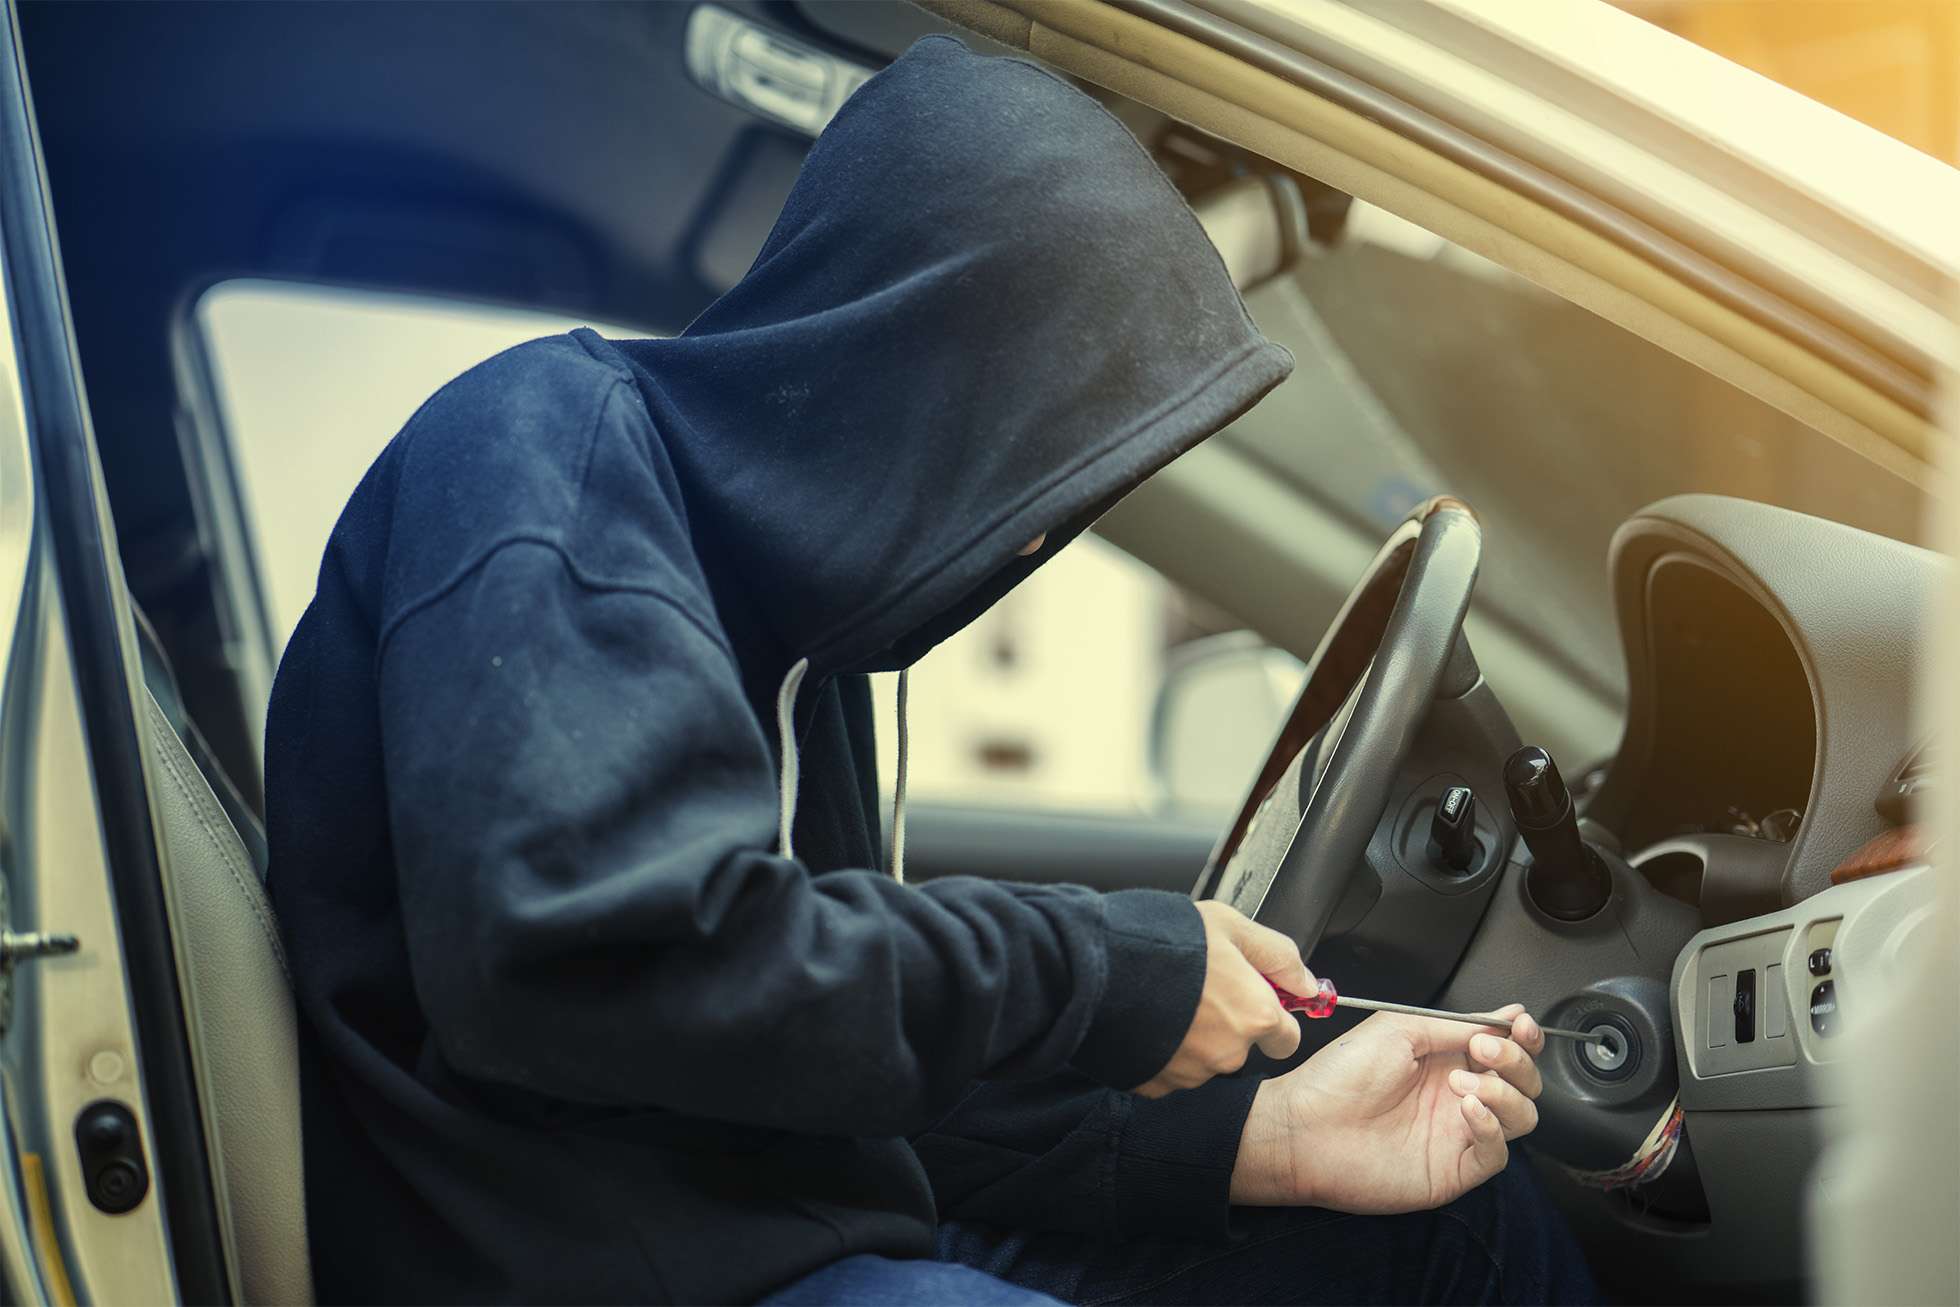 Vehicle Theft Laws Pc 487 D 1 Vc 10851 A In California Criminal Defense Attorney In Ontario Ca